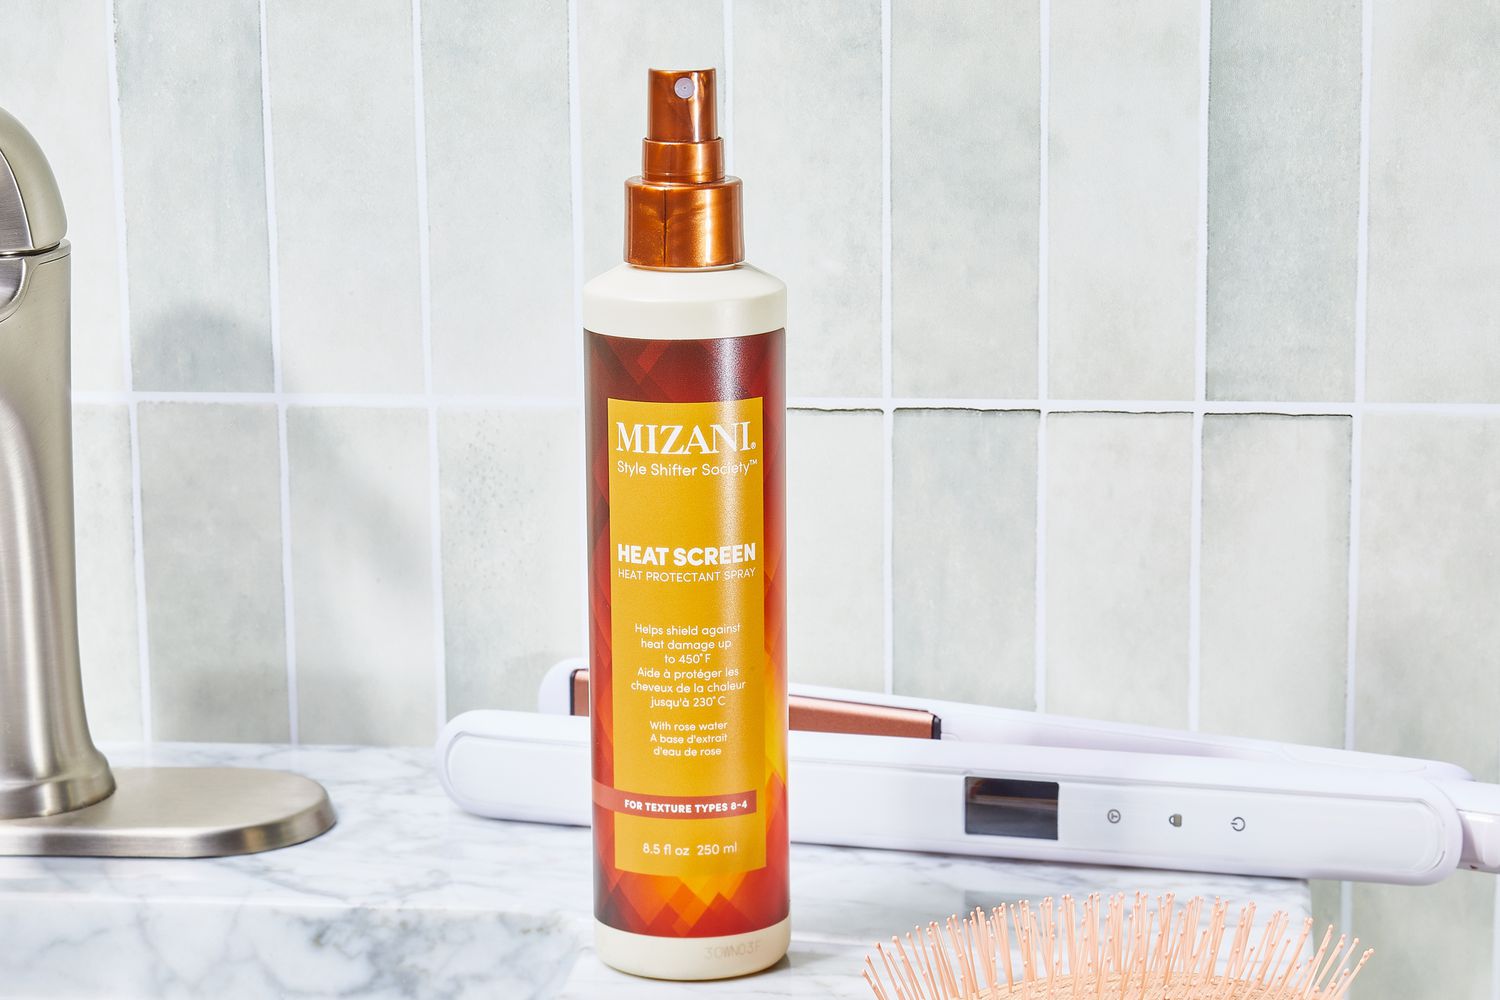 Mizani Heat Screen Hair Protectant Spray bottle sits on bathroom counter with hair styling tools